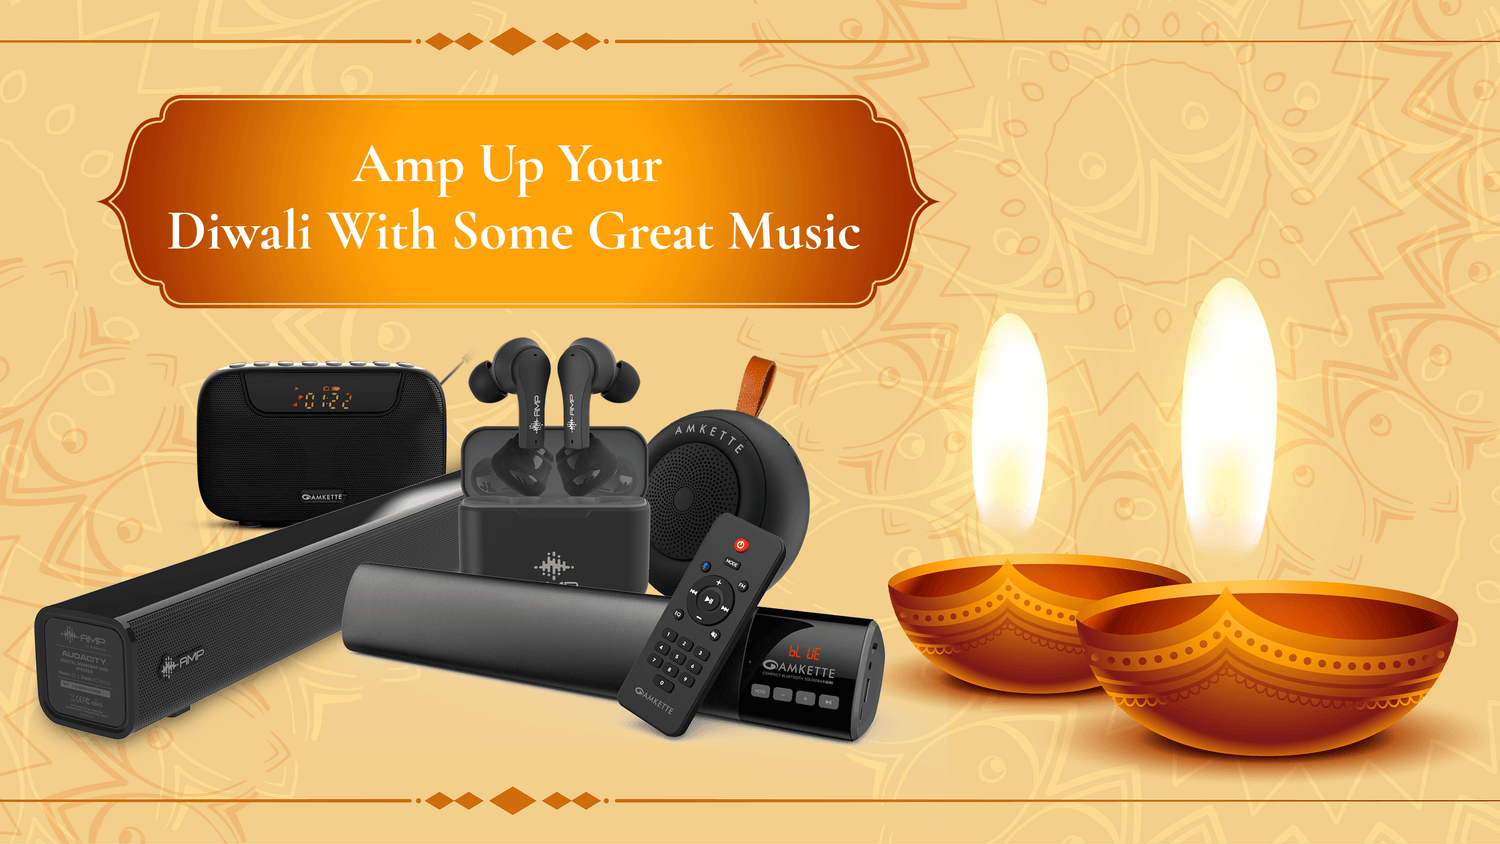 Blending The Lights Of Diwali With Great Music Is The Perfect Way To Celebrate It